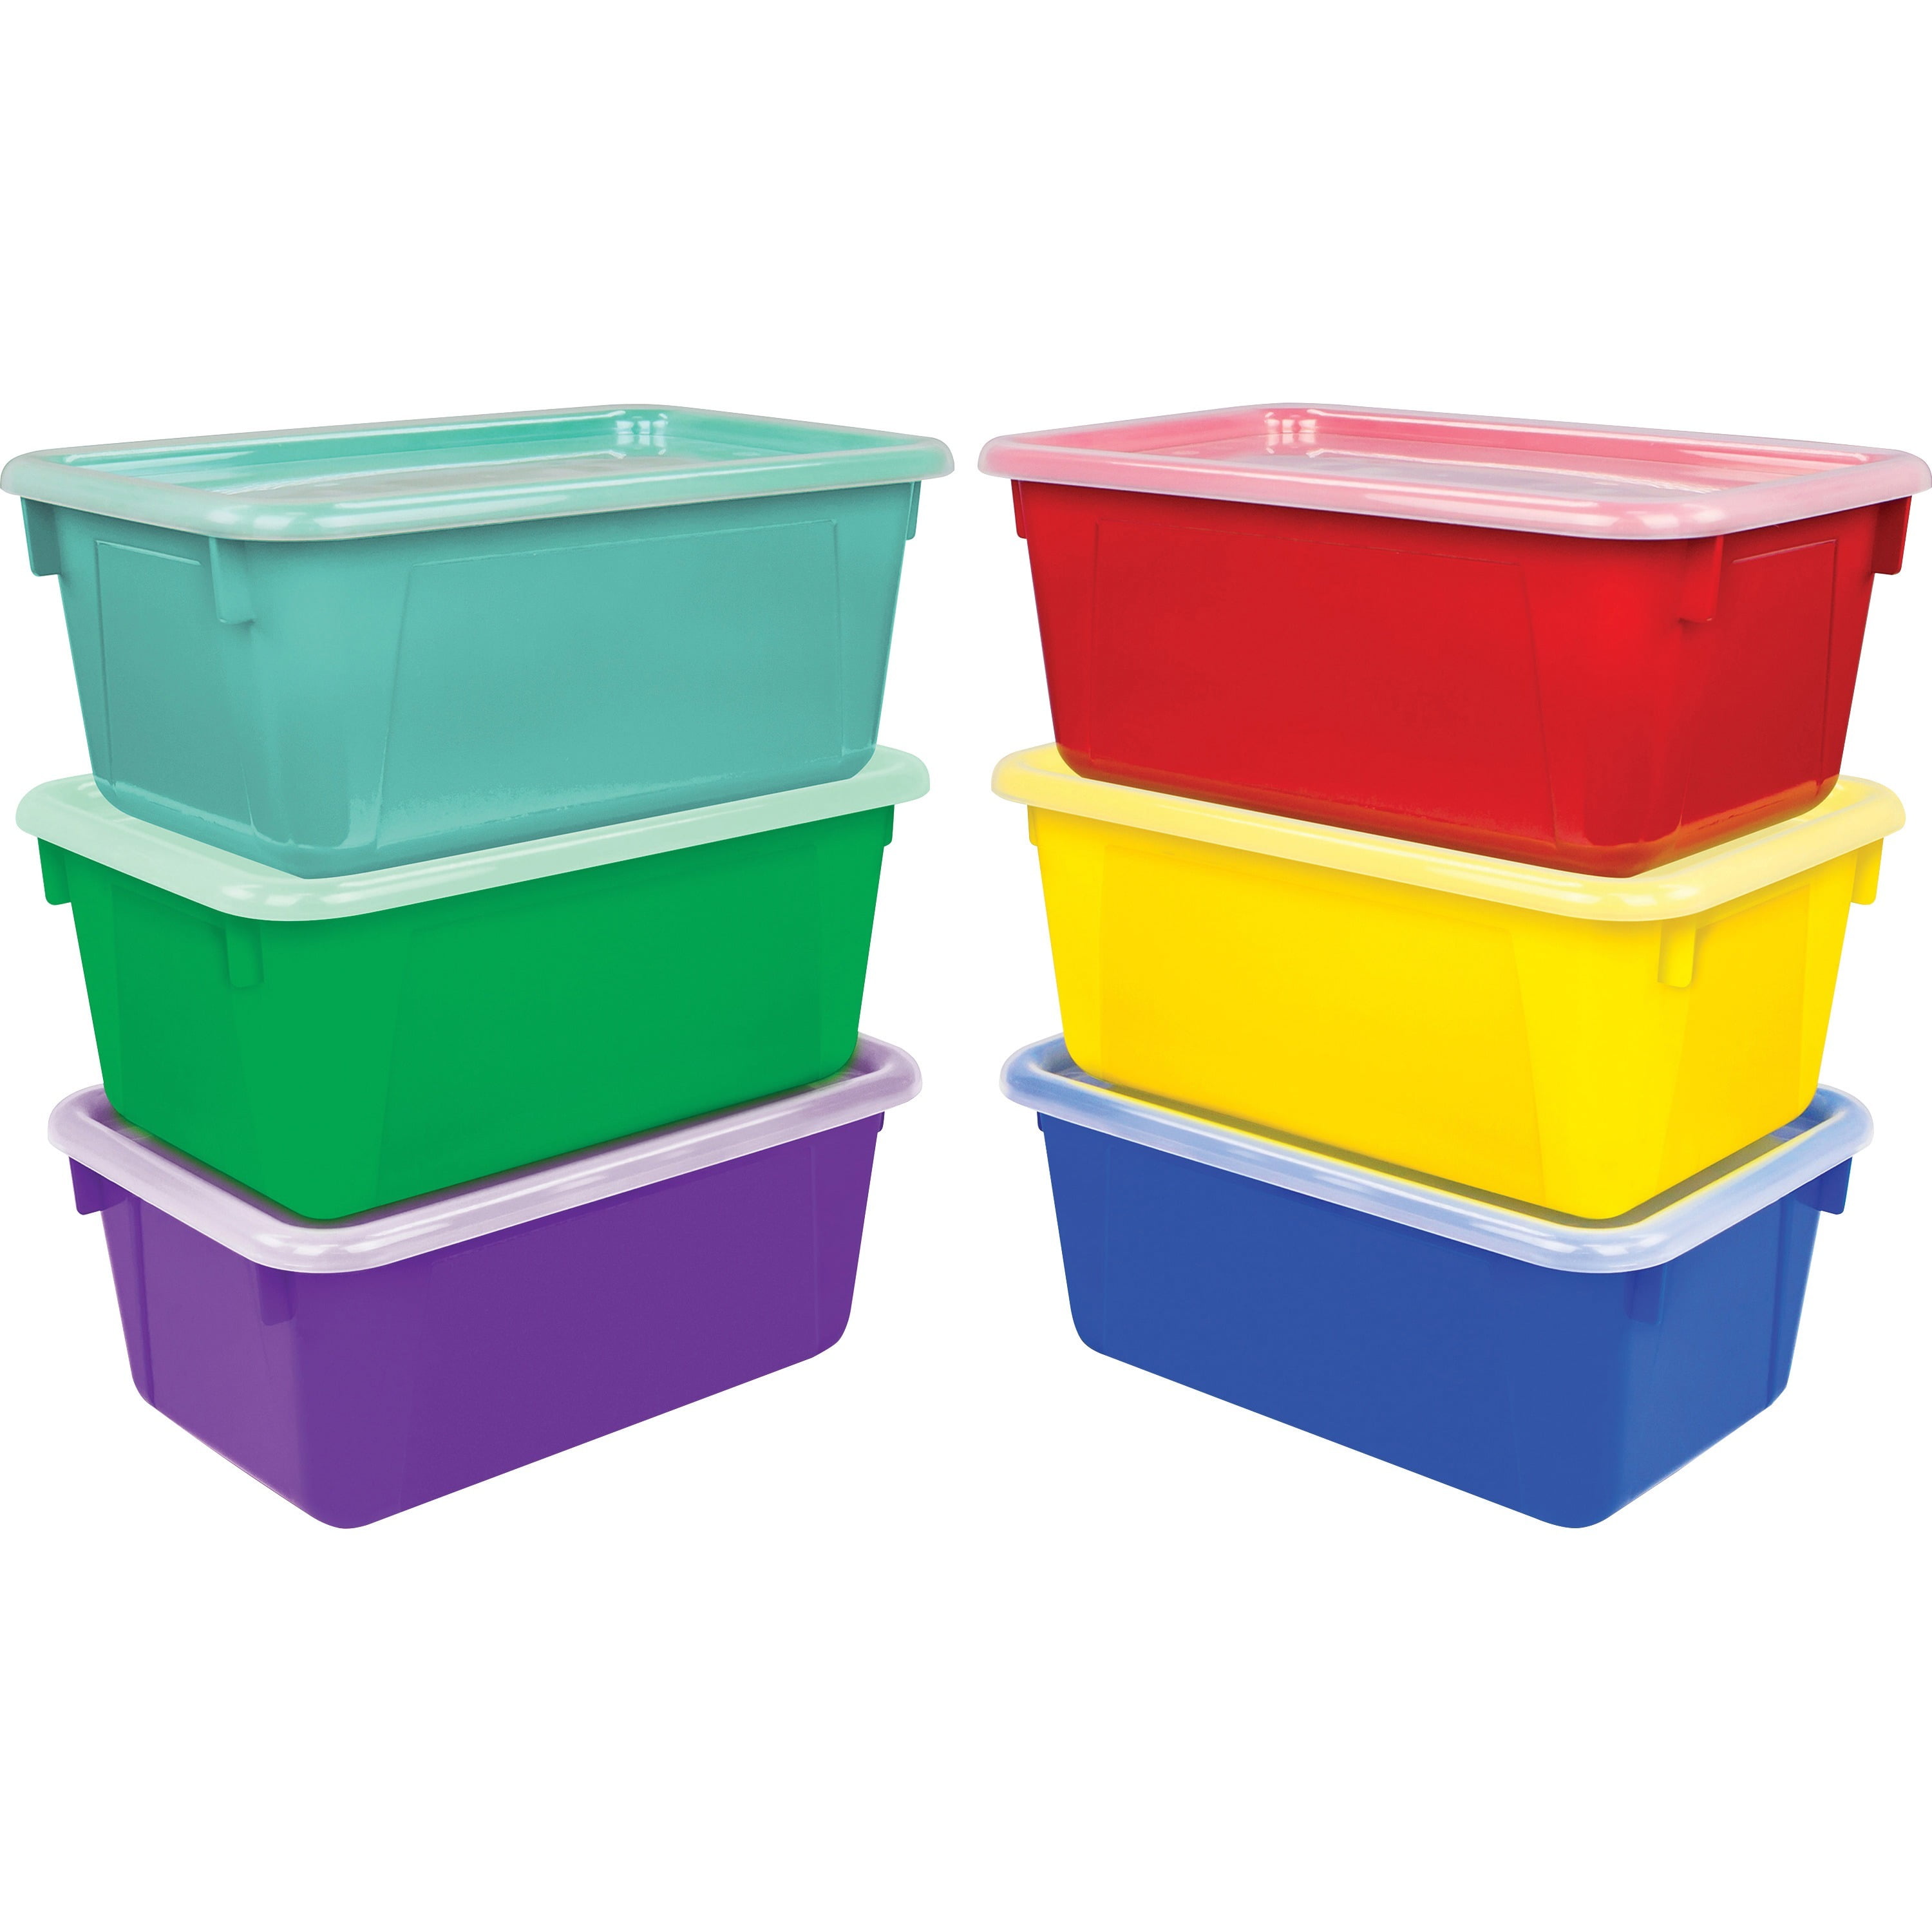 Red Small Plastic Storage Bin 6 Pack - TCR2088577